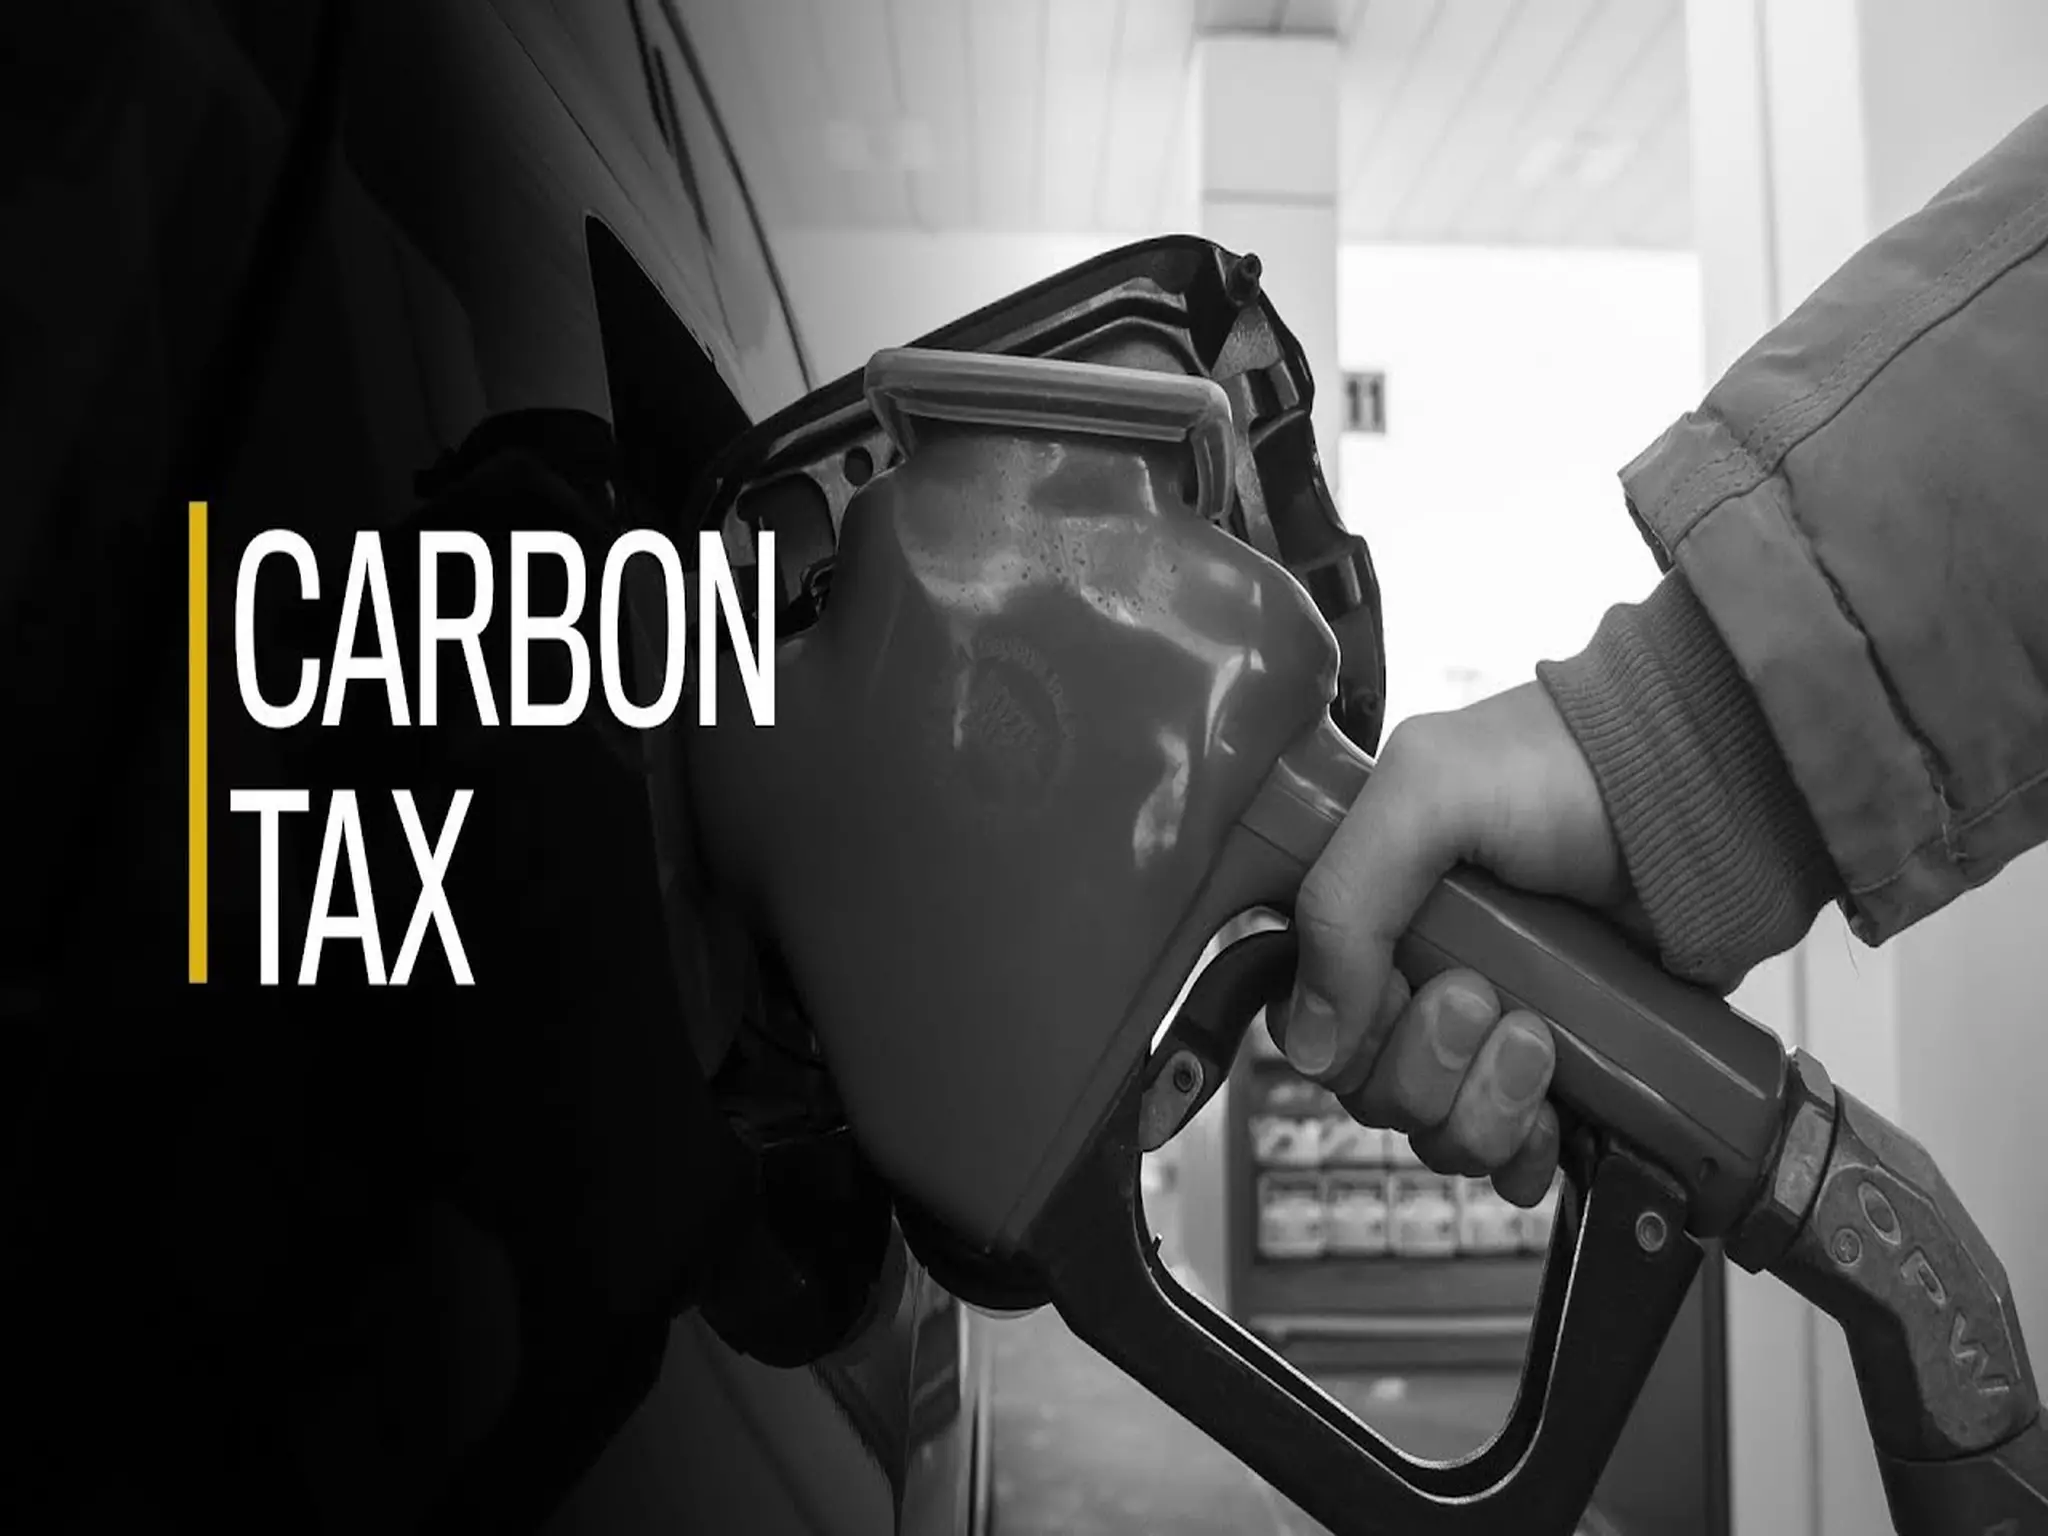 Canadians get up to $386 in first carbon tax rebate